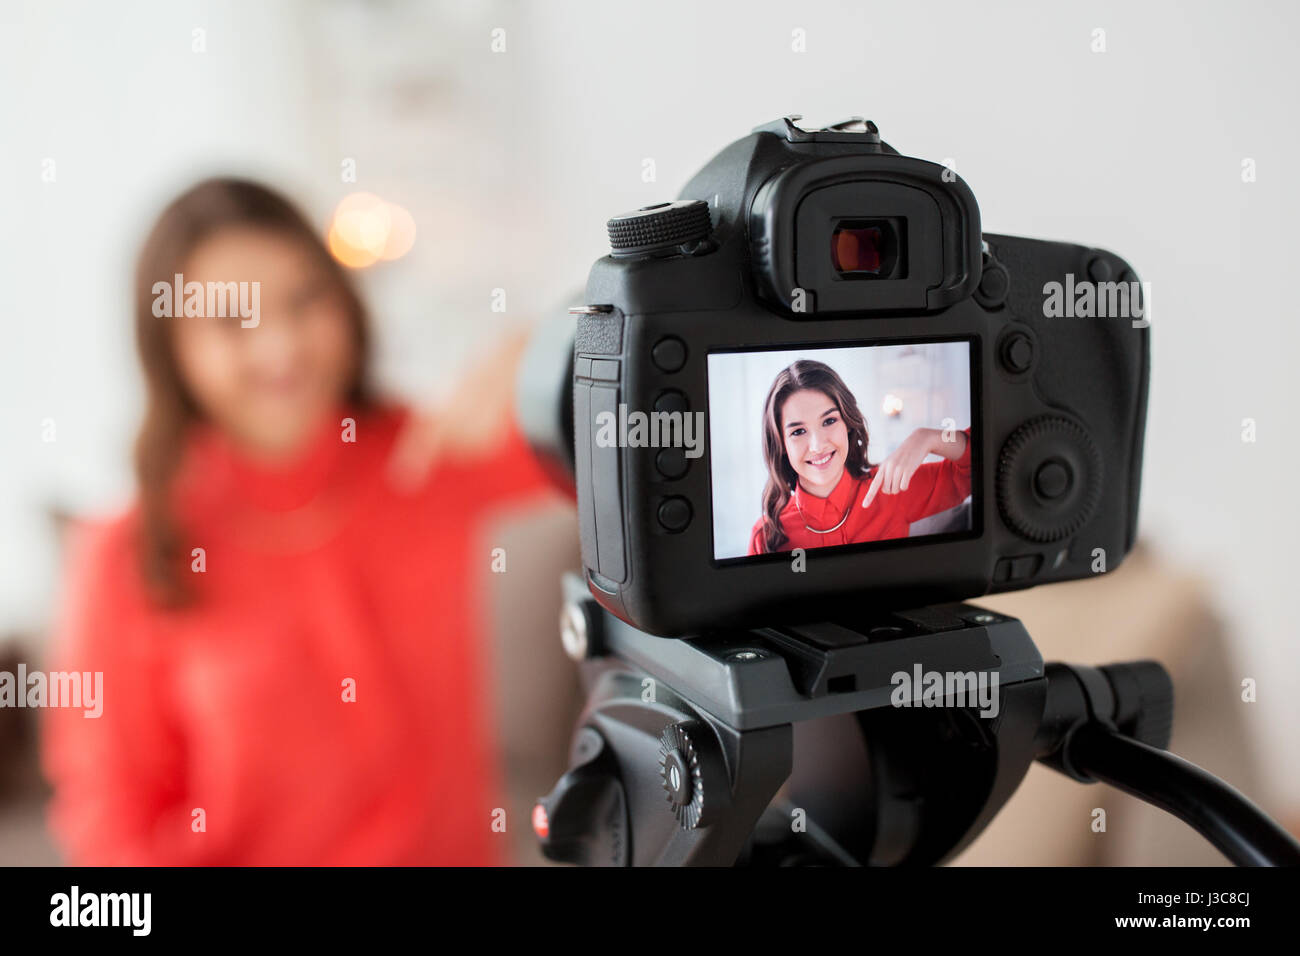 woman with camera recording video at home Stock Photo